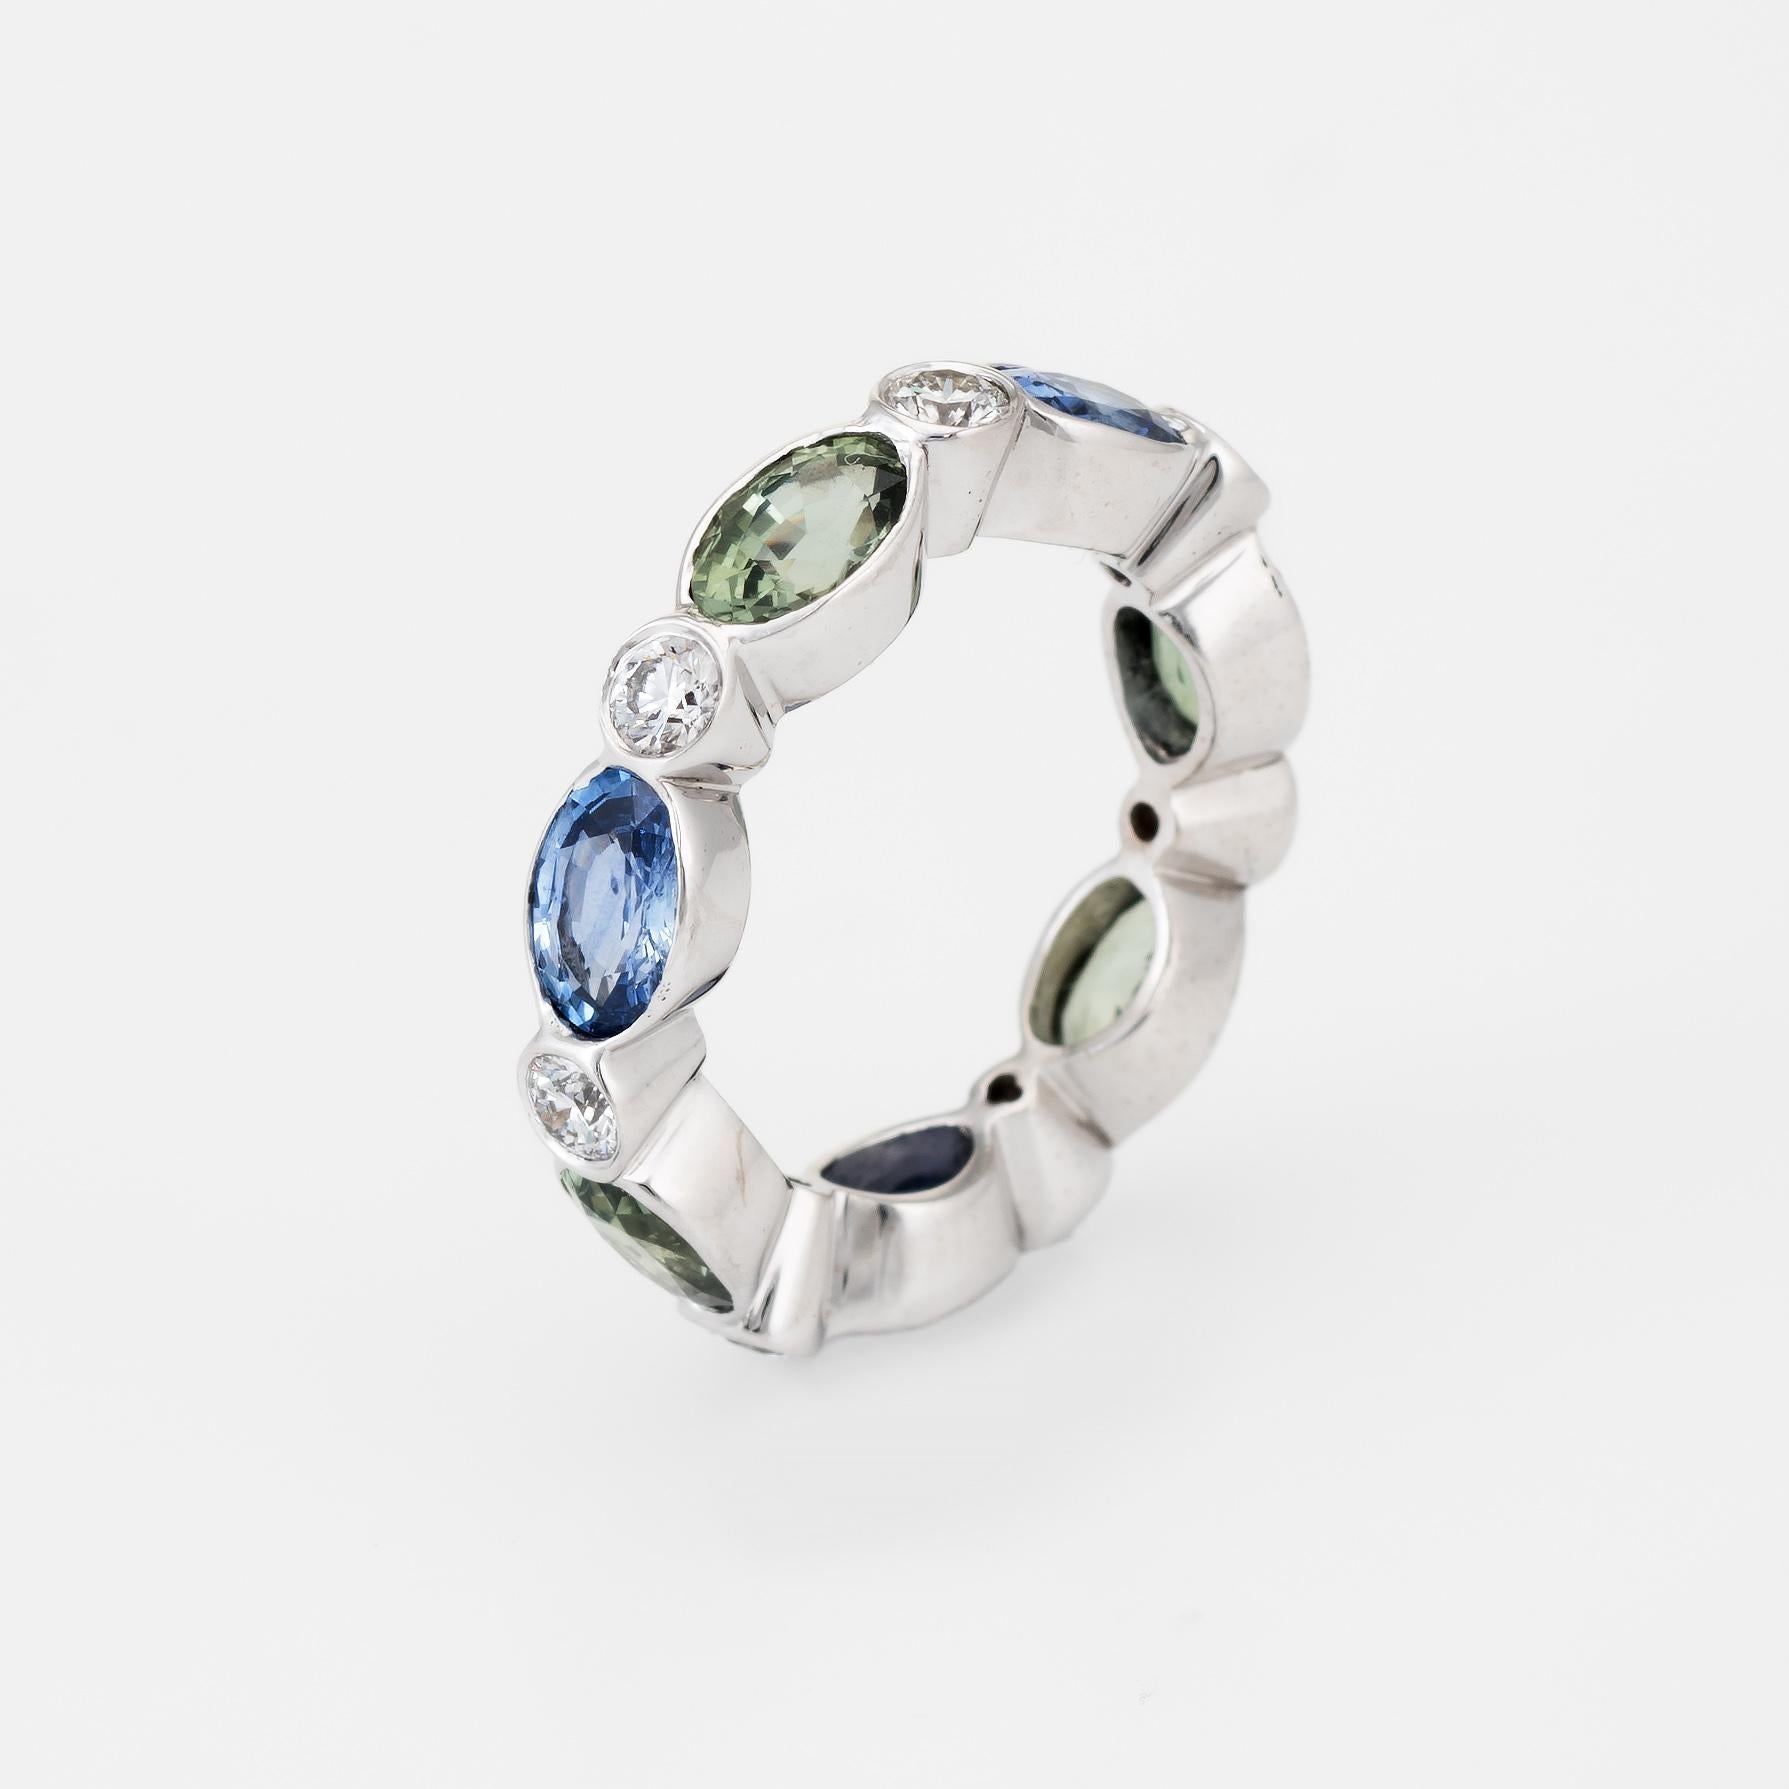 Finely detailed estate eternity ring, crafted in 18 karat white gold. 

Faceted oval cut green and blue sapphires each measure 6mm x 4mm (estimated at 0.50 carats each - 3.50 carats total estimated weight), accented with an estimated 0.42 carats of